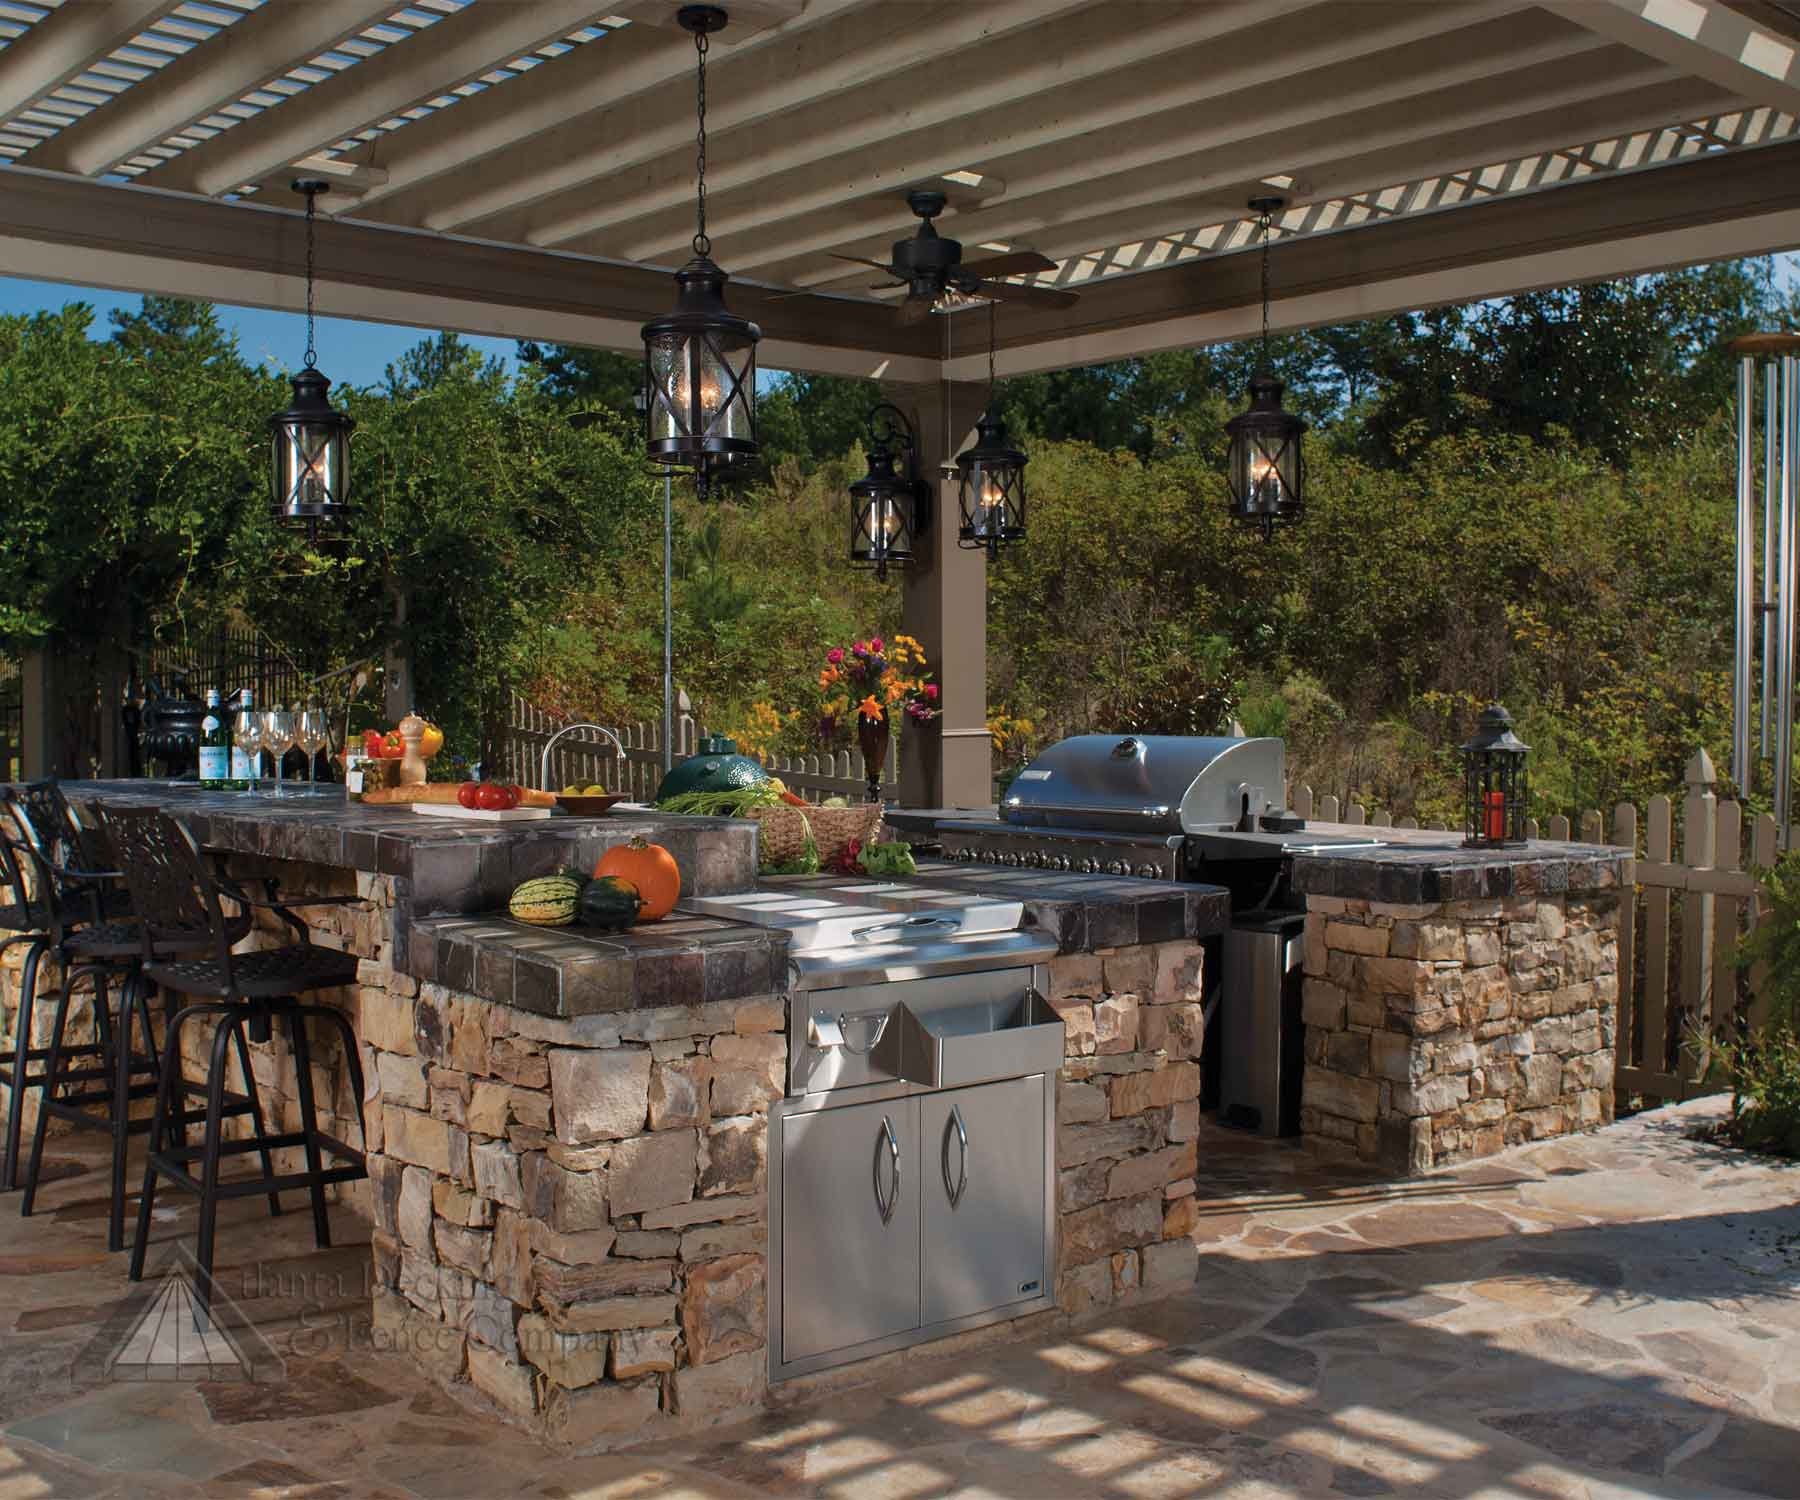 Patio Outdoor Kitchen
 Outdoor Kitchen Designing The Perfect Backyard Cooking